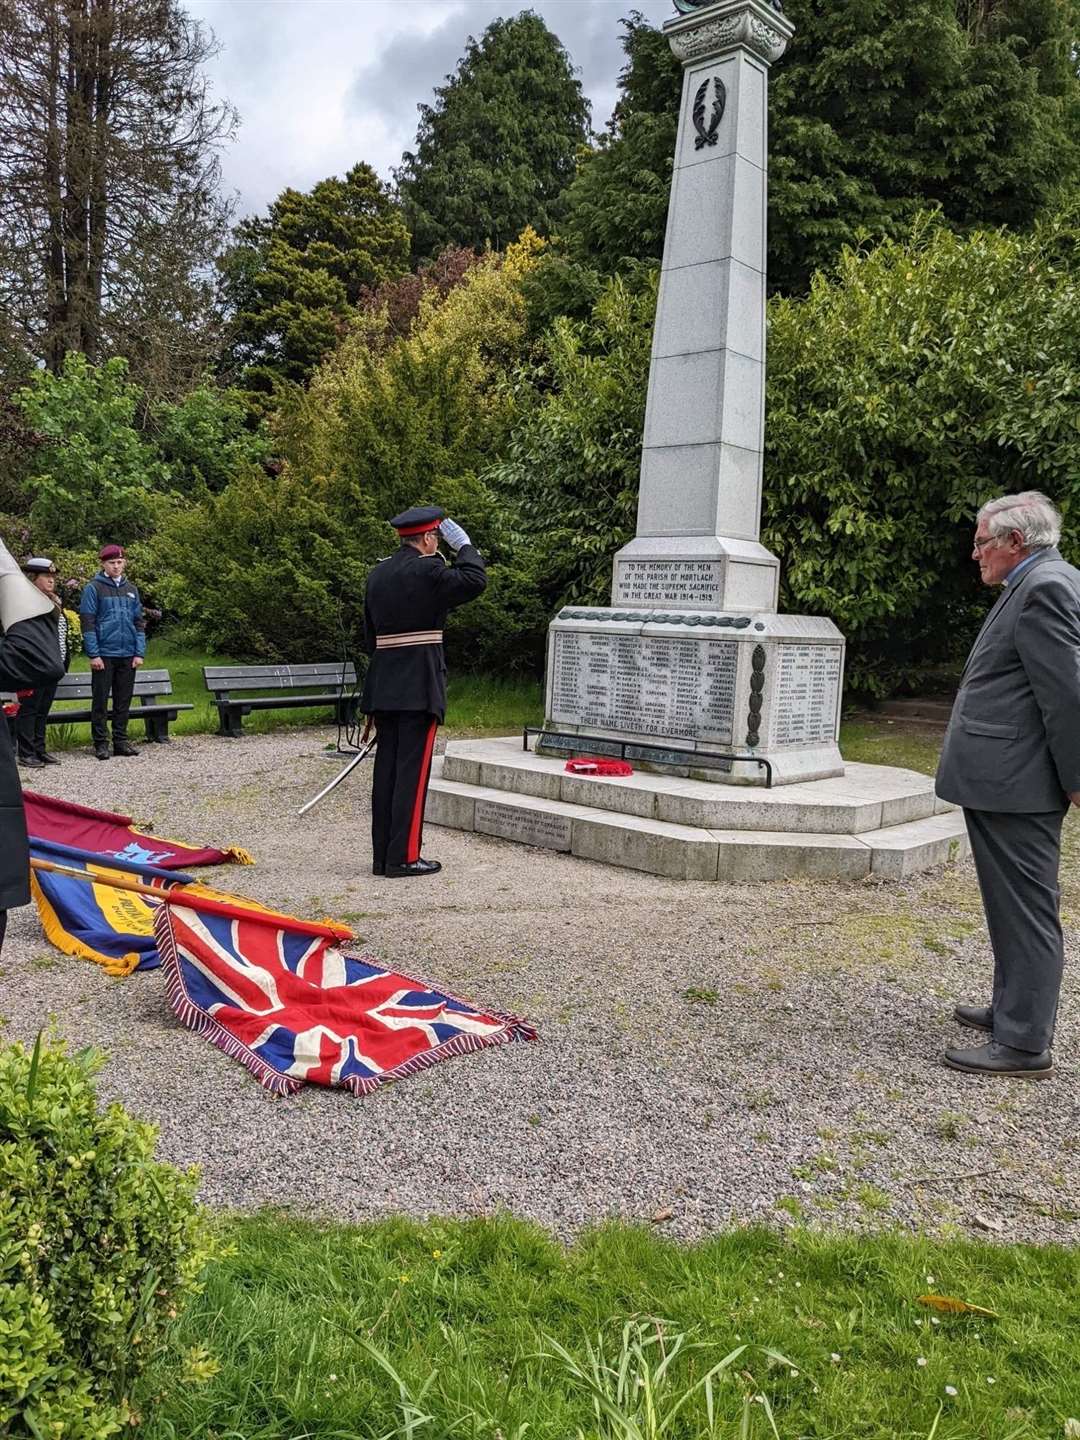 Representatives laid wreaths at a memorial for the 40th anniversary of the end of the Falklands conflict